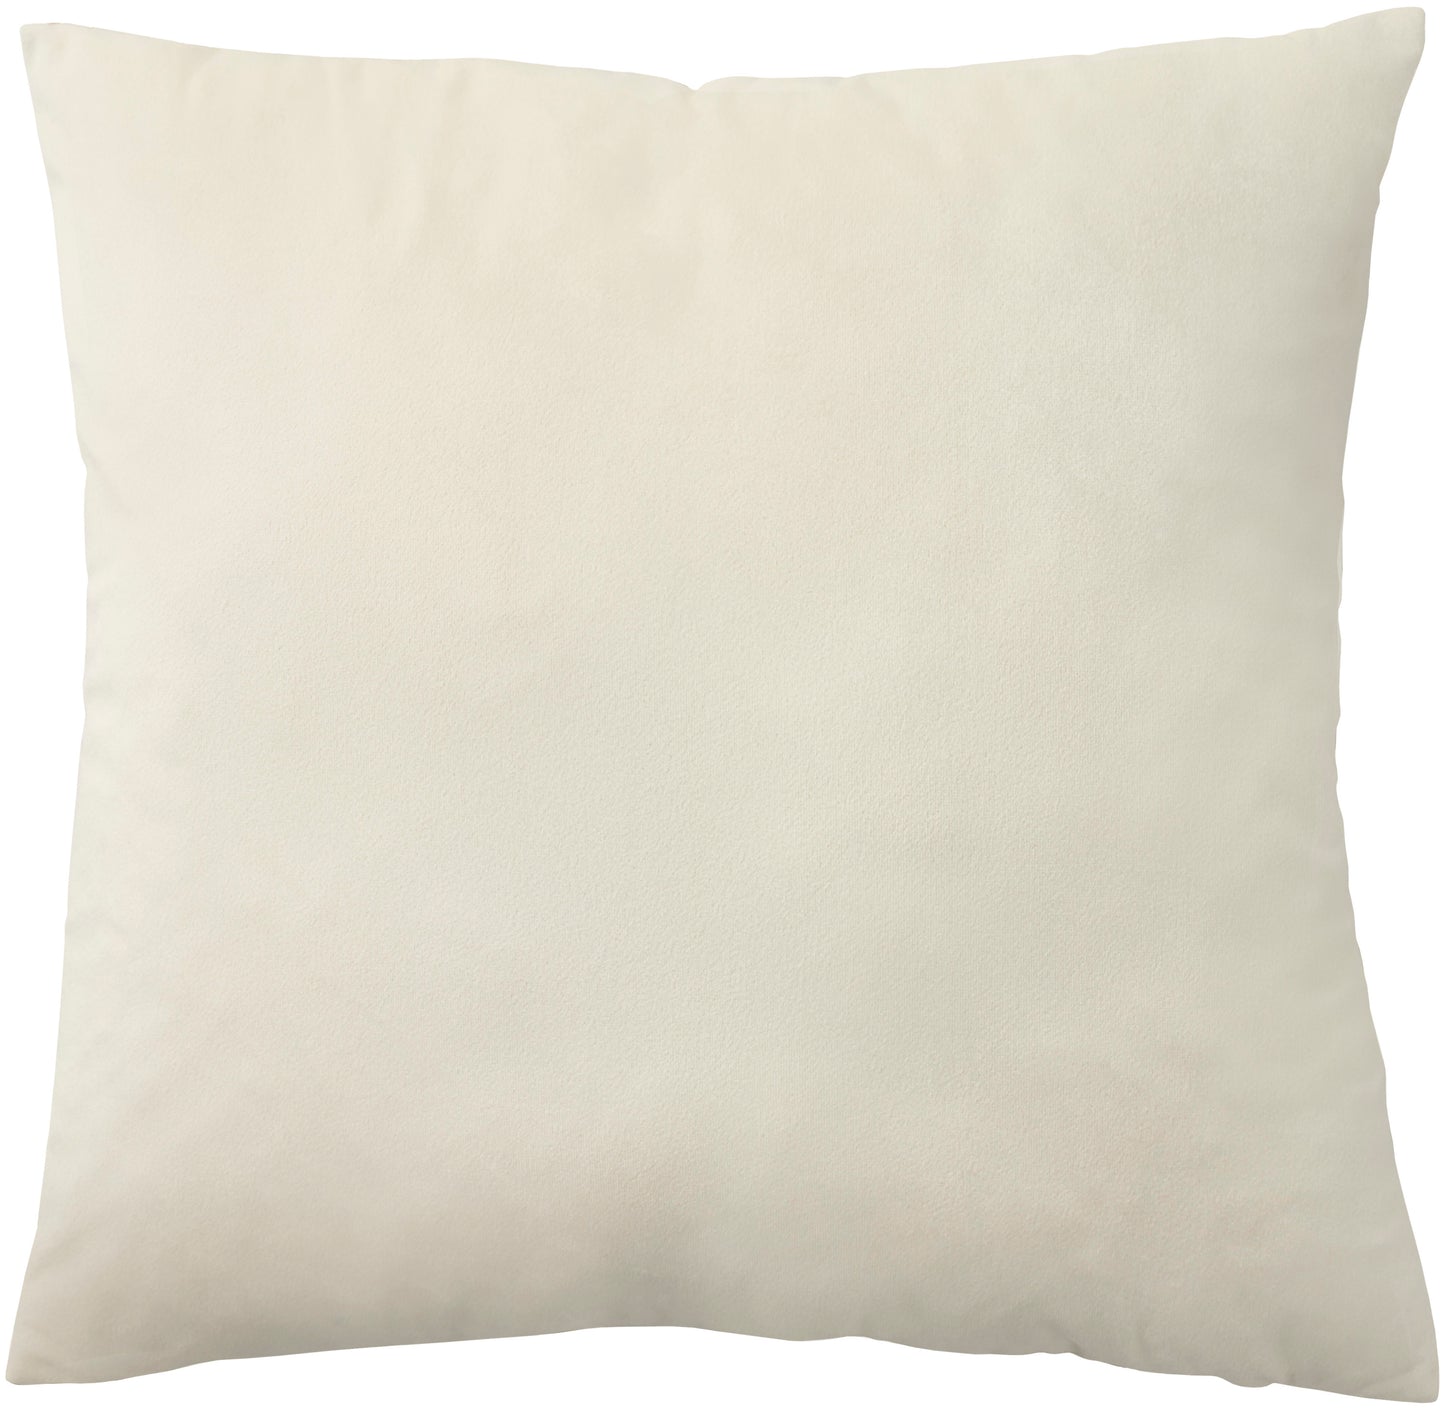 SOFIA BJ109 Synthetic Blend Metallic Marble Throw Pillow From Mina Victory By Nourison Rugs